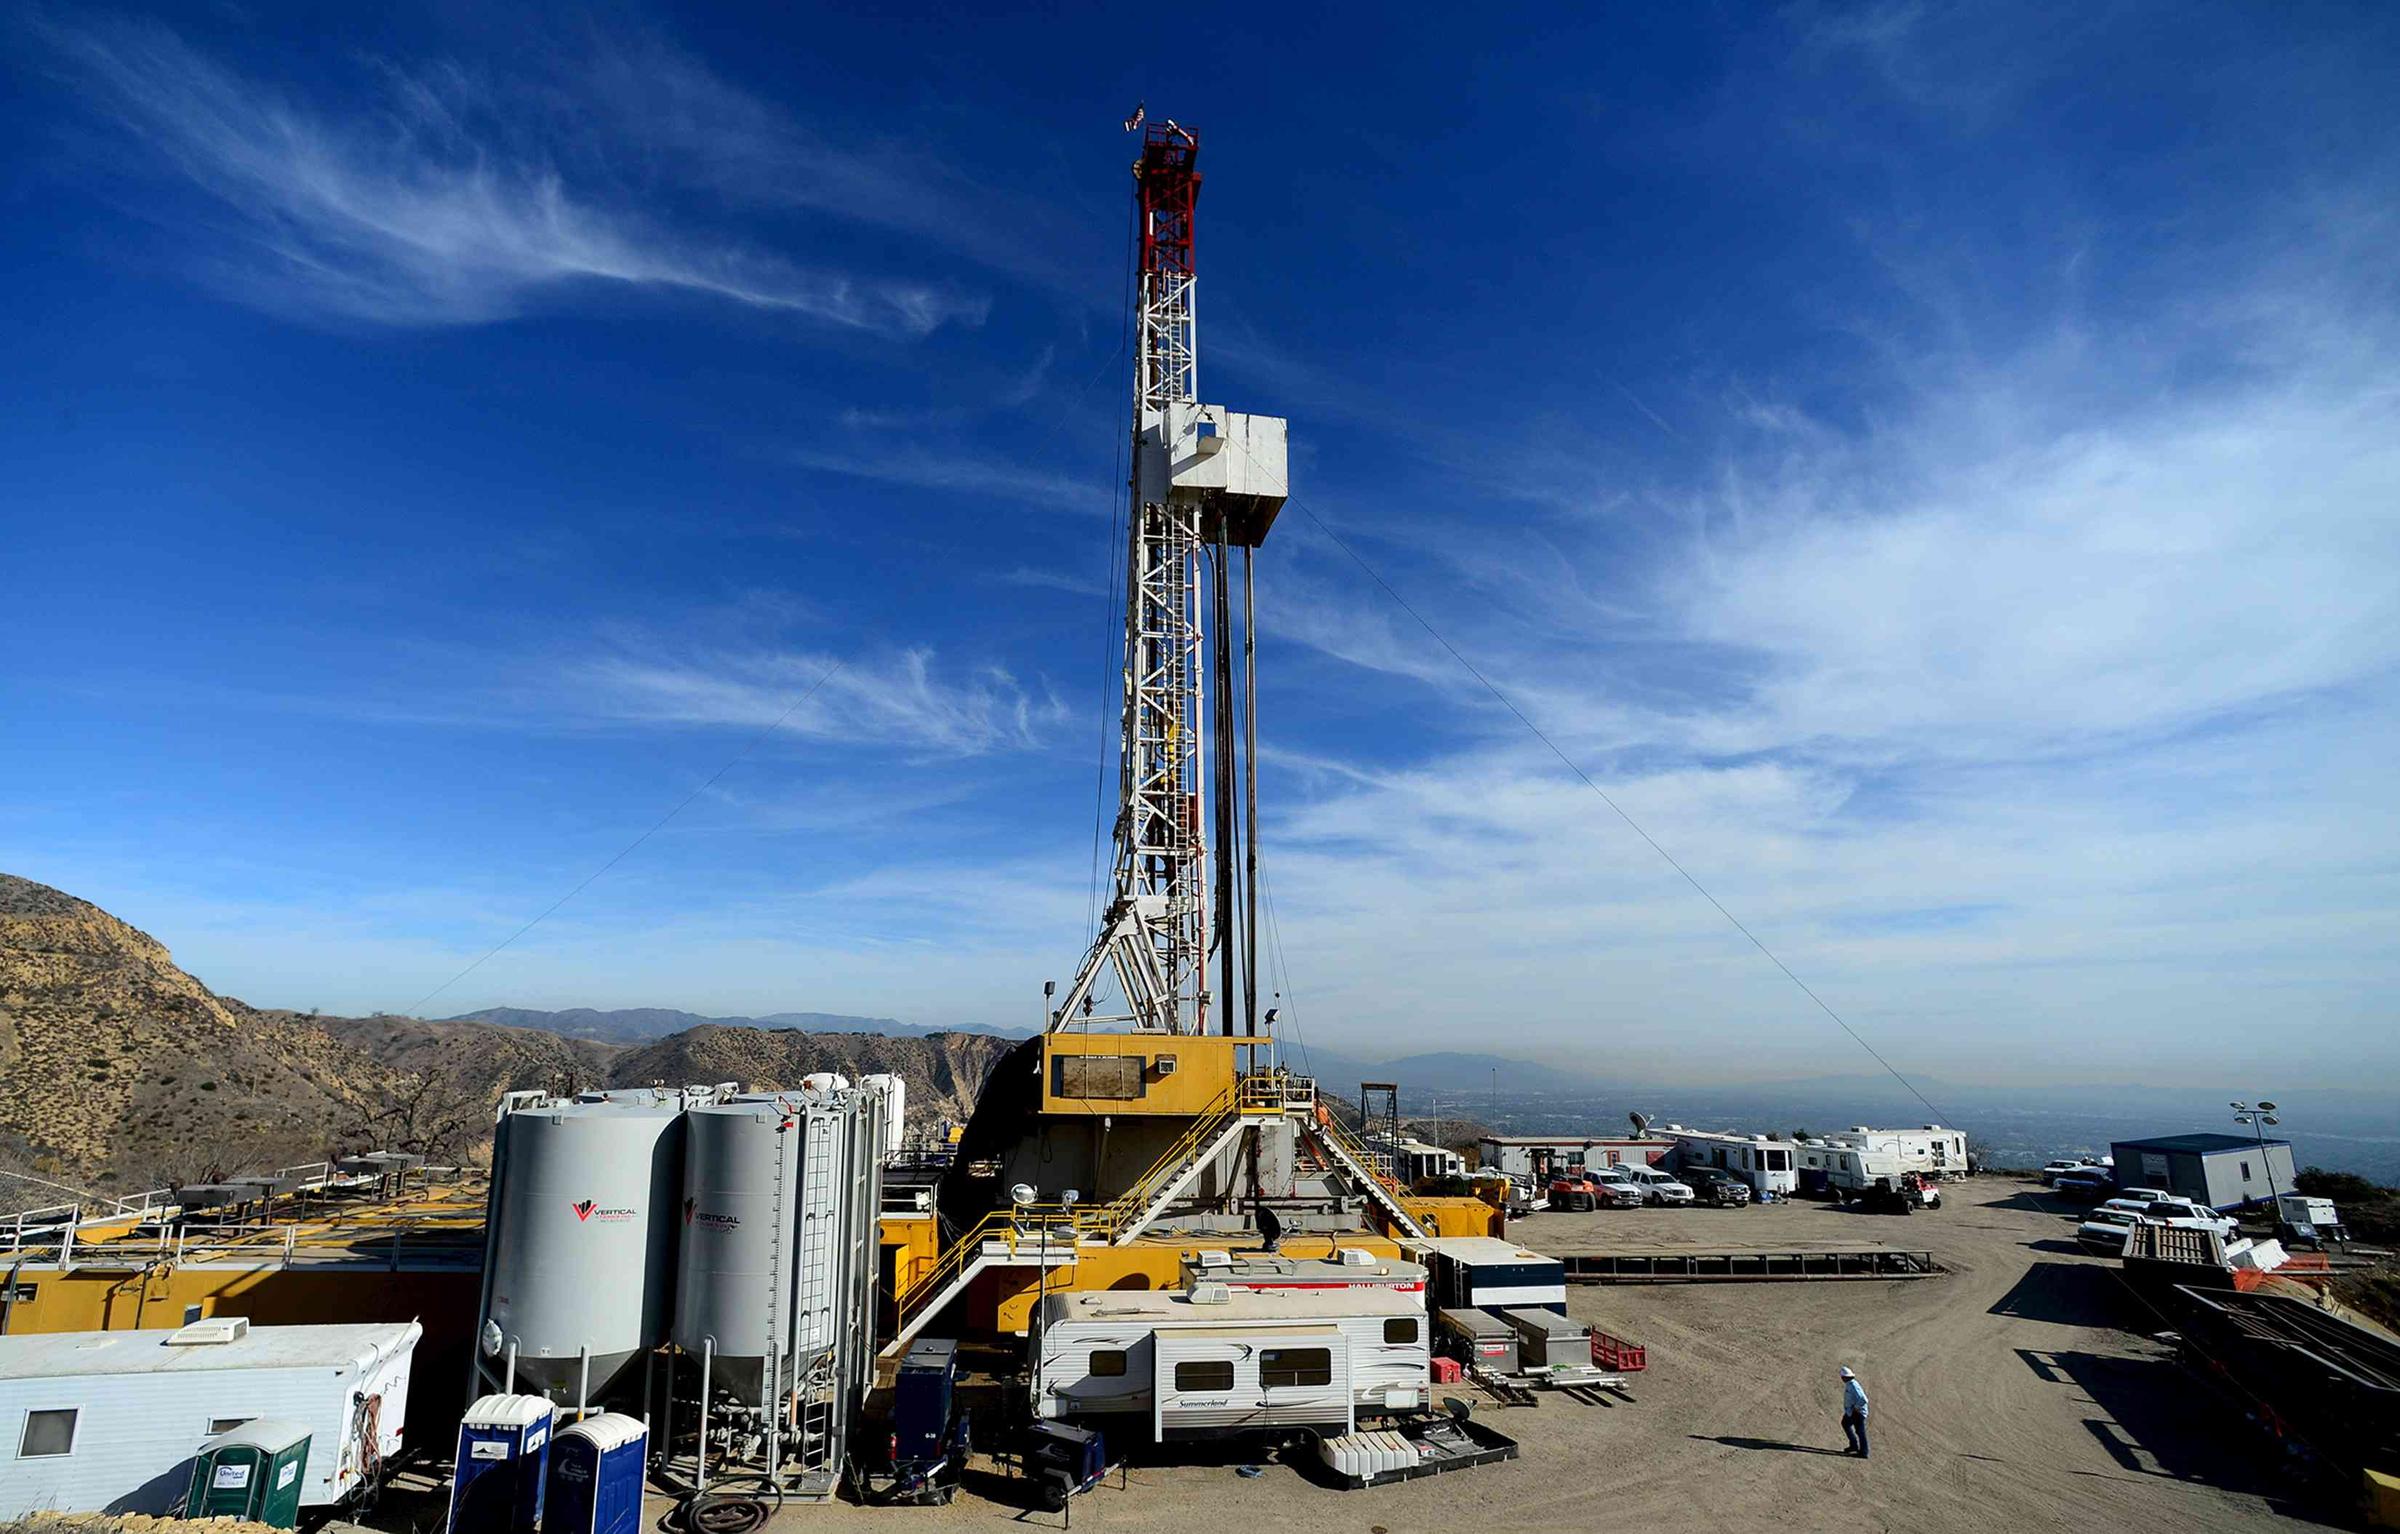 just-how-big-is-the-natural-gas-leak-in-california-wbfo